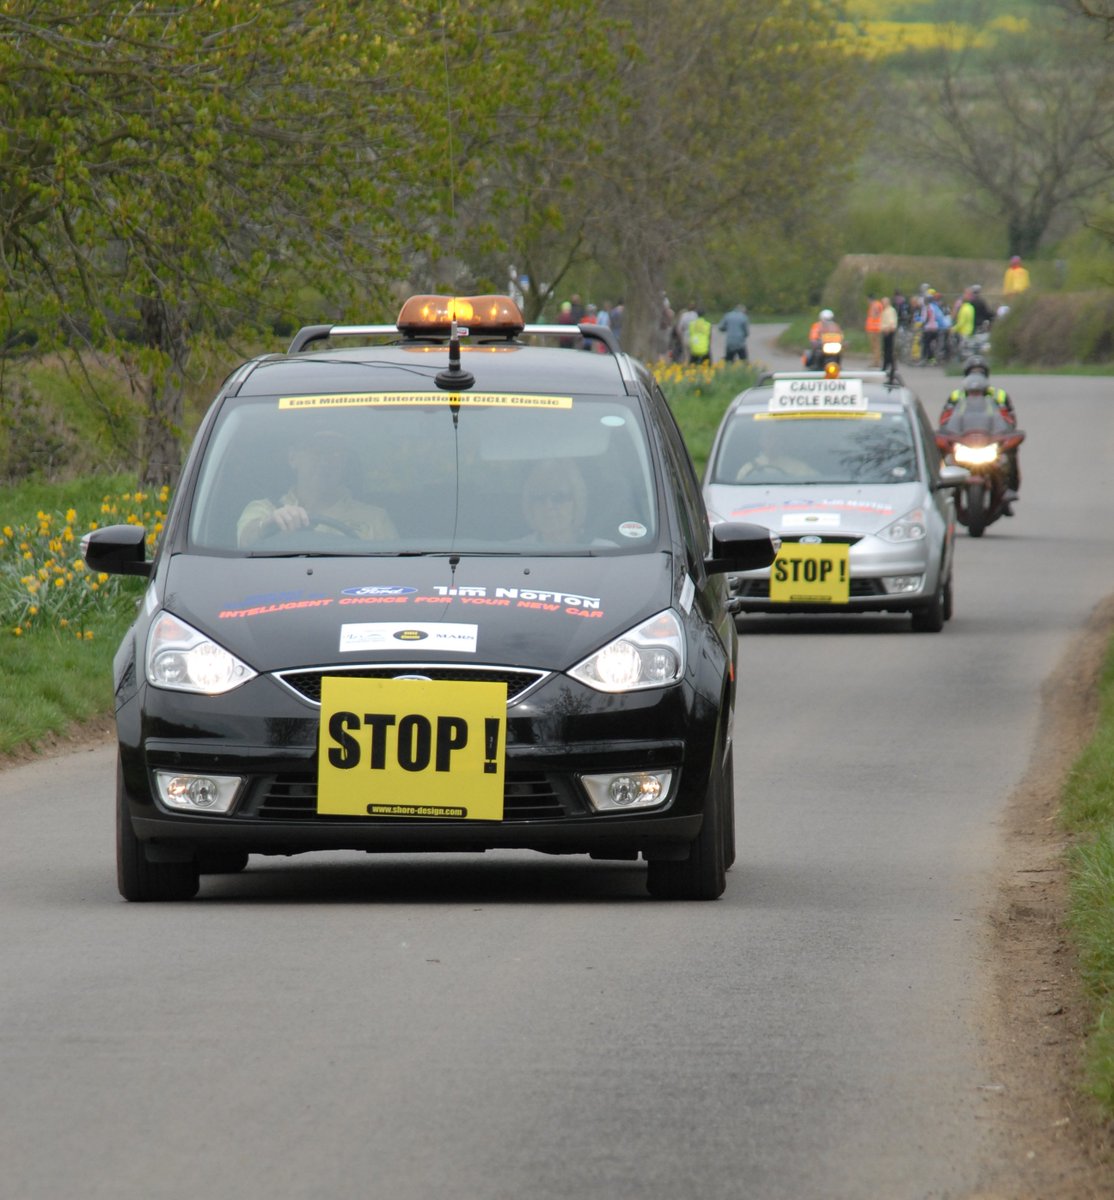 Always leading the way, @CiCLECLassic and on @DiscoverRutland roads, @TimNortonFord Stay ahead of the pack on 23 April, look for @Ford